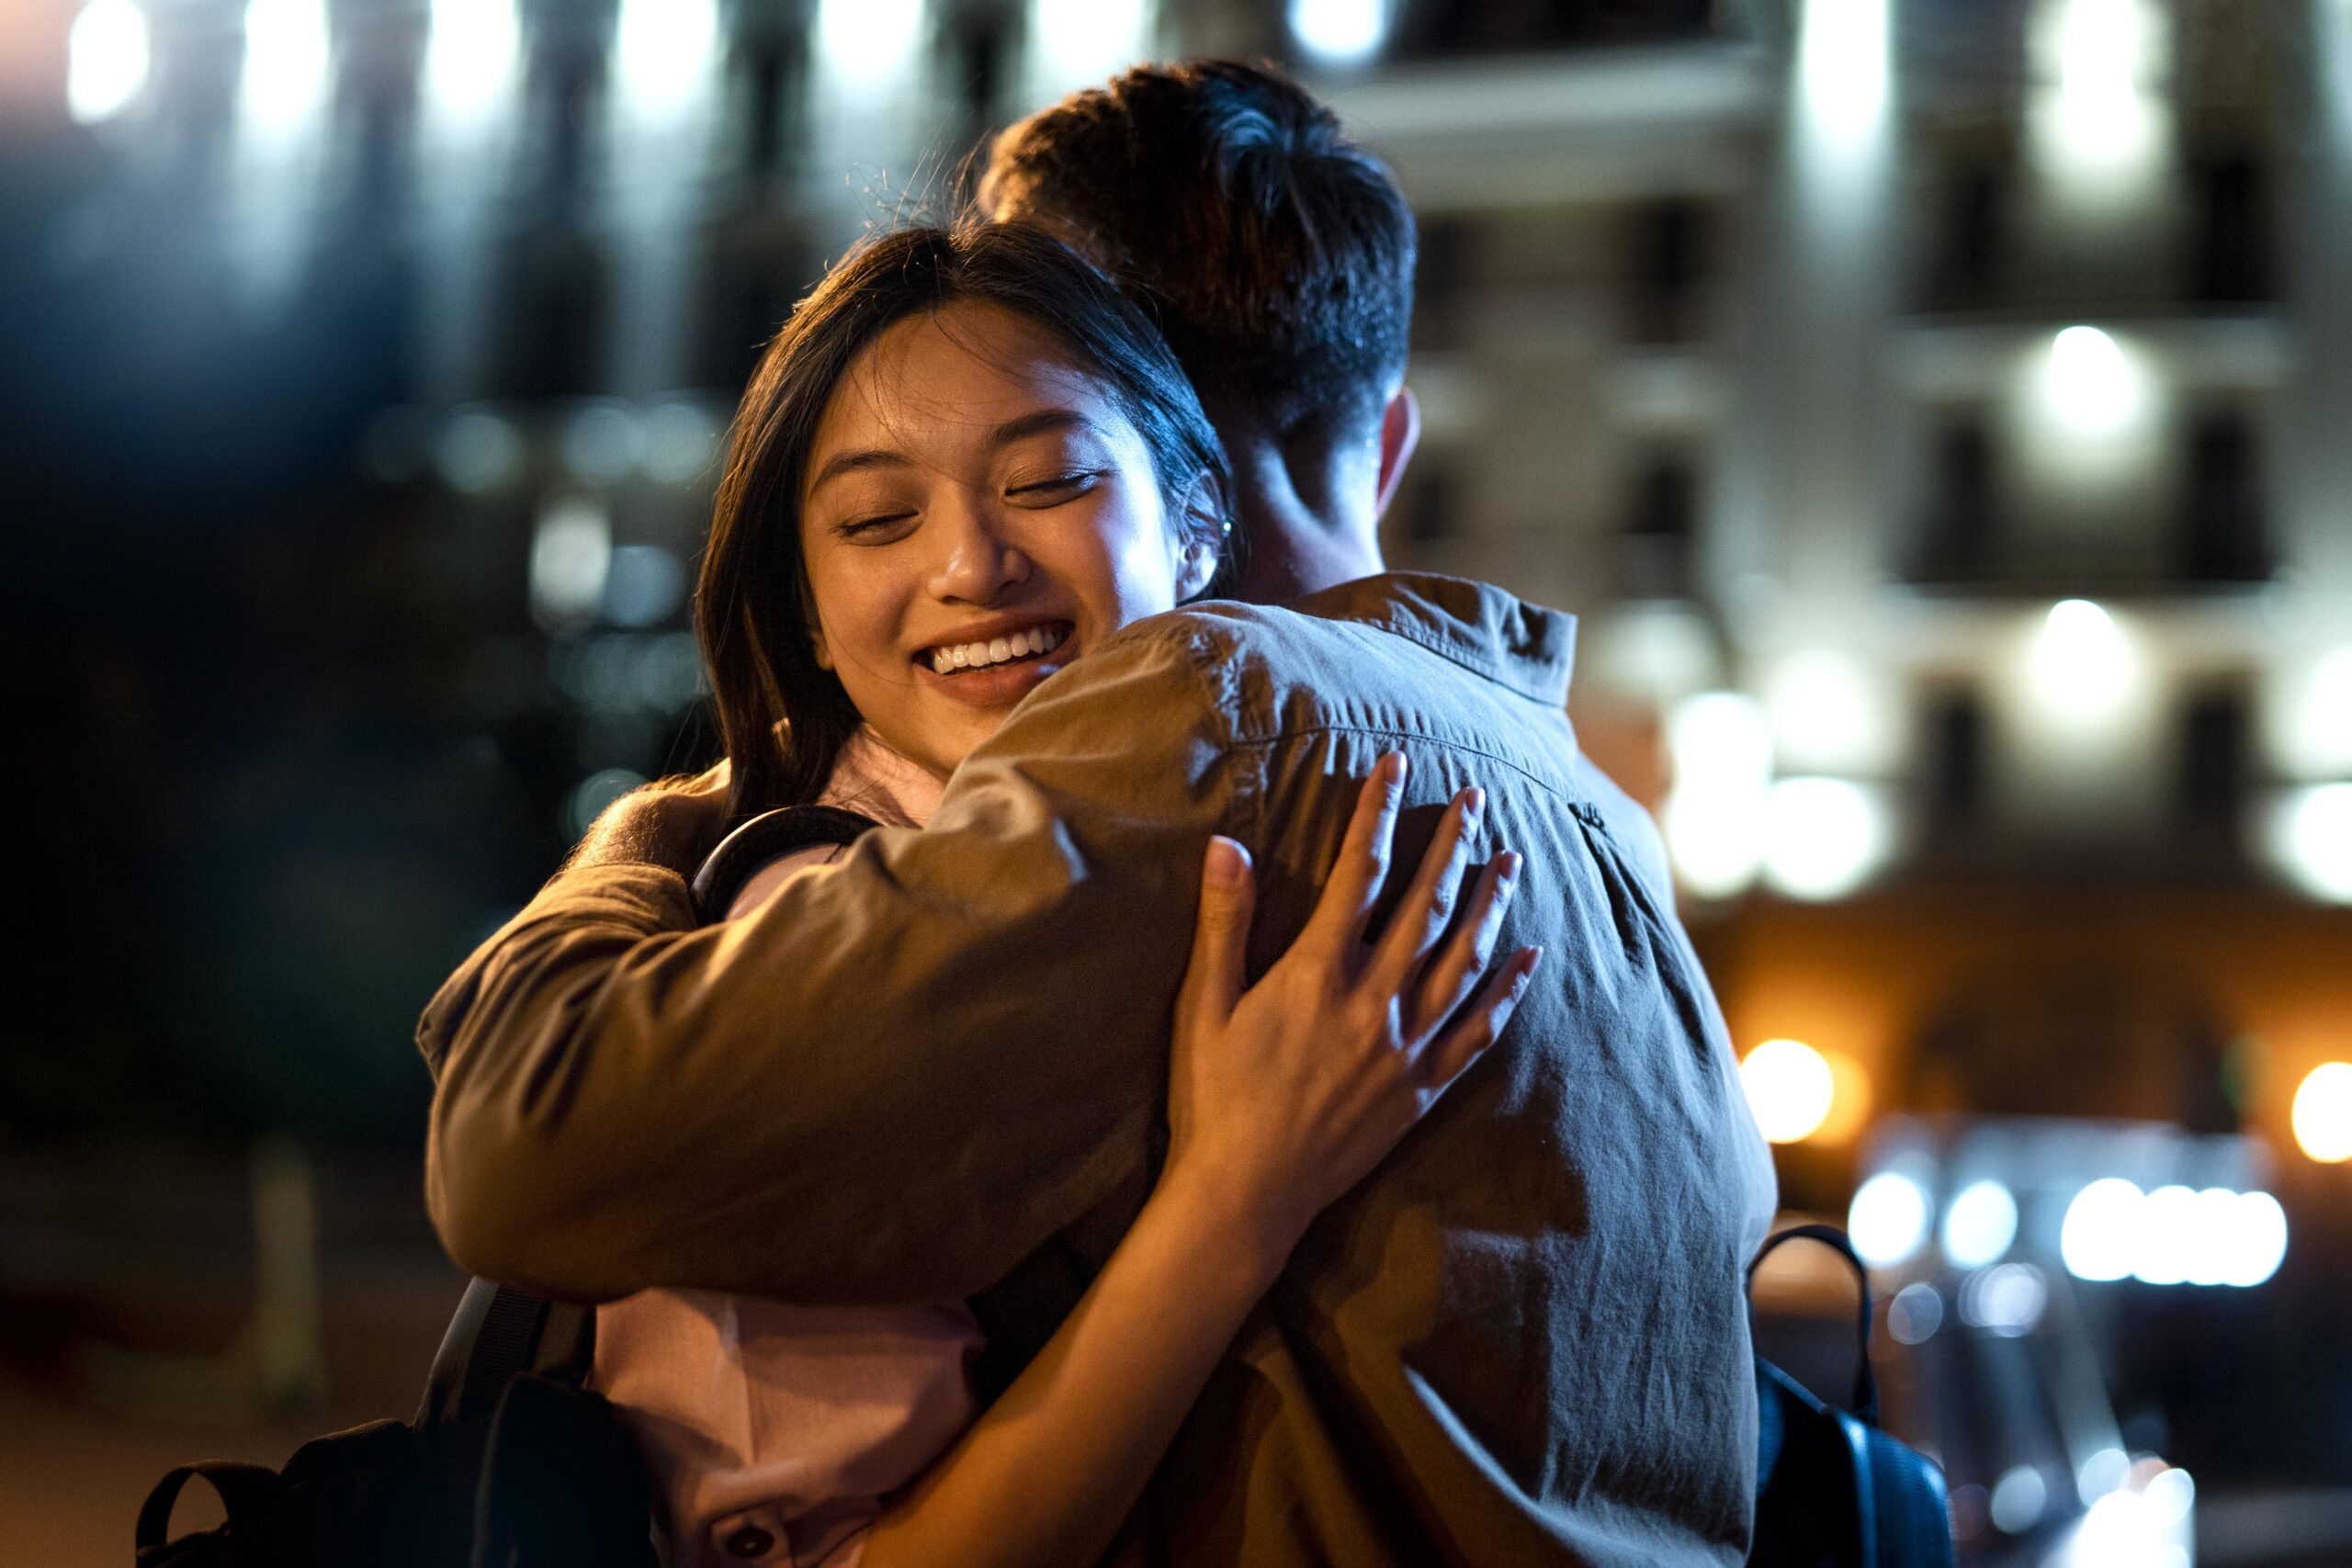 man-and-woman-hugging-at-night-in-the-city-lights